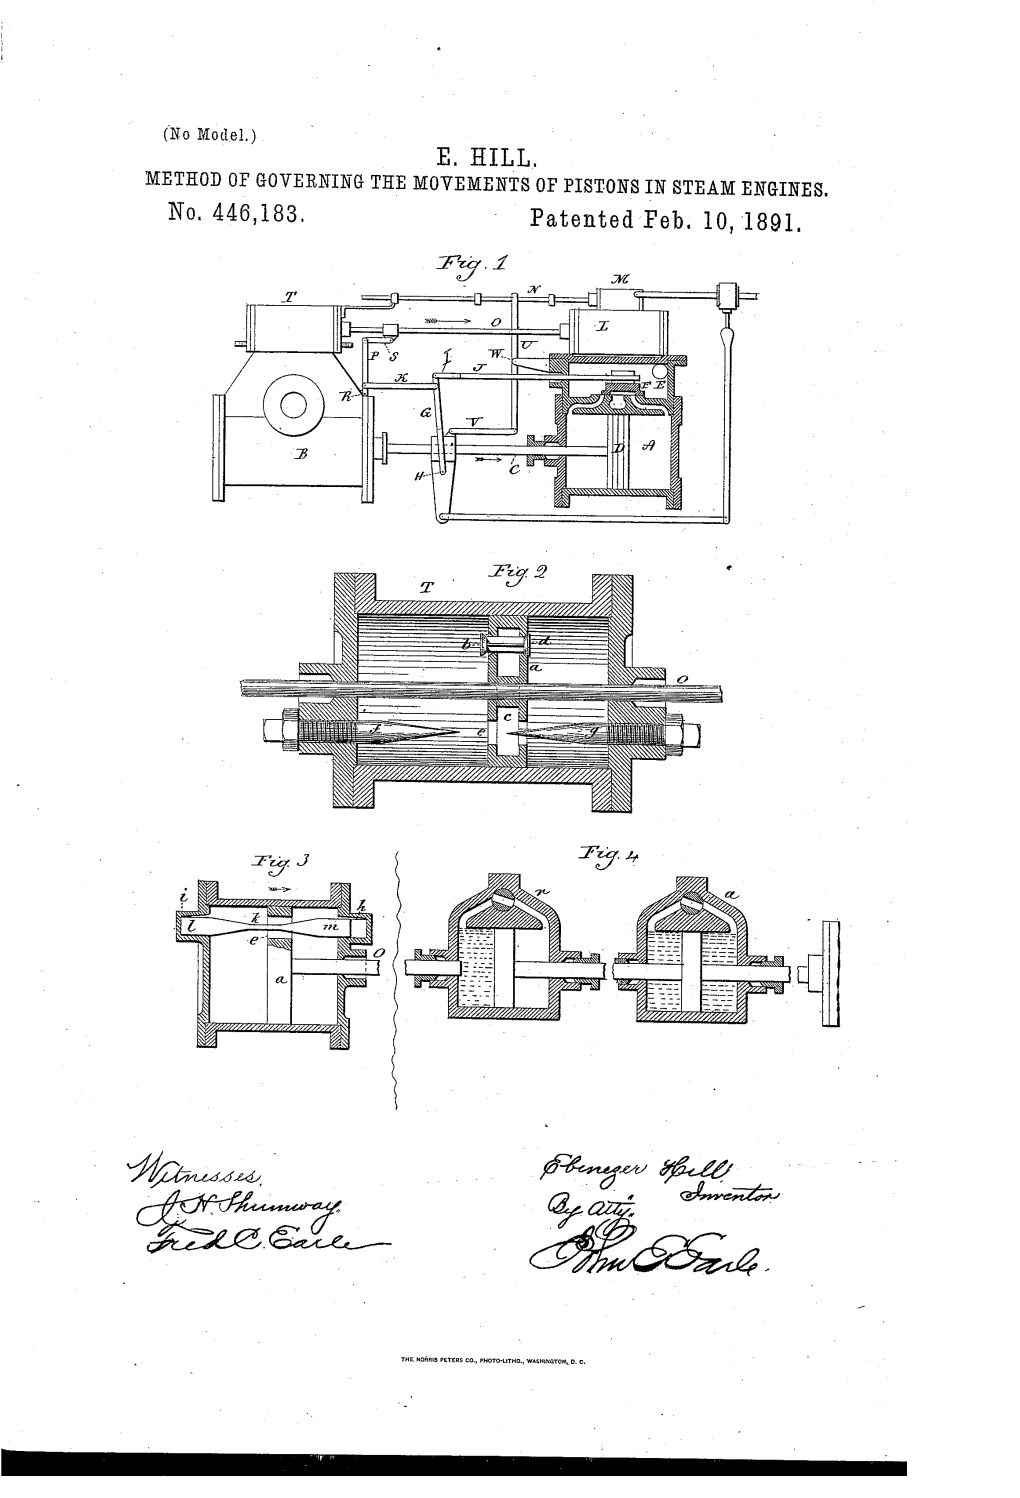 E. HILL, METHOD of GOVERNING the MOVEMENTS of PISTONS in Steamengines. No